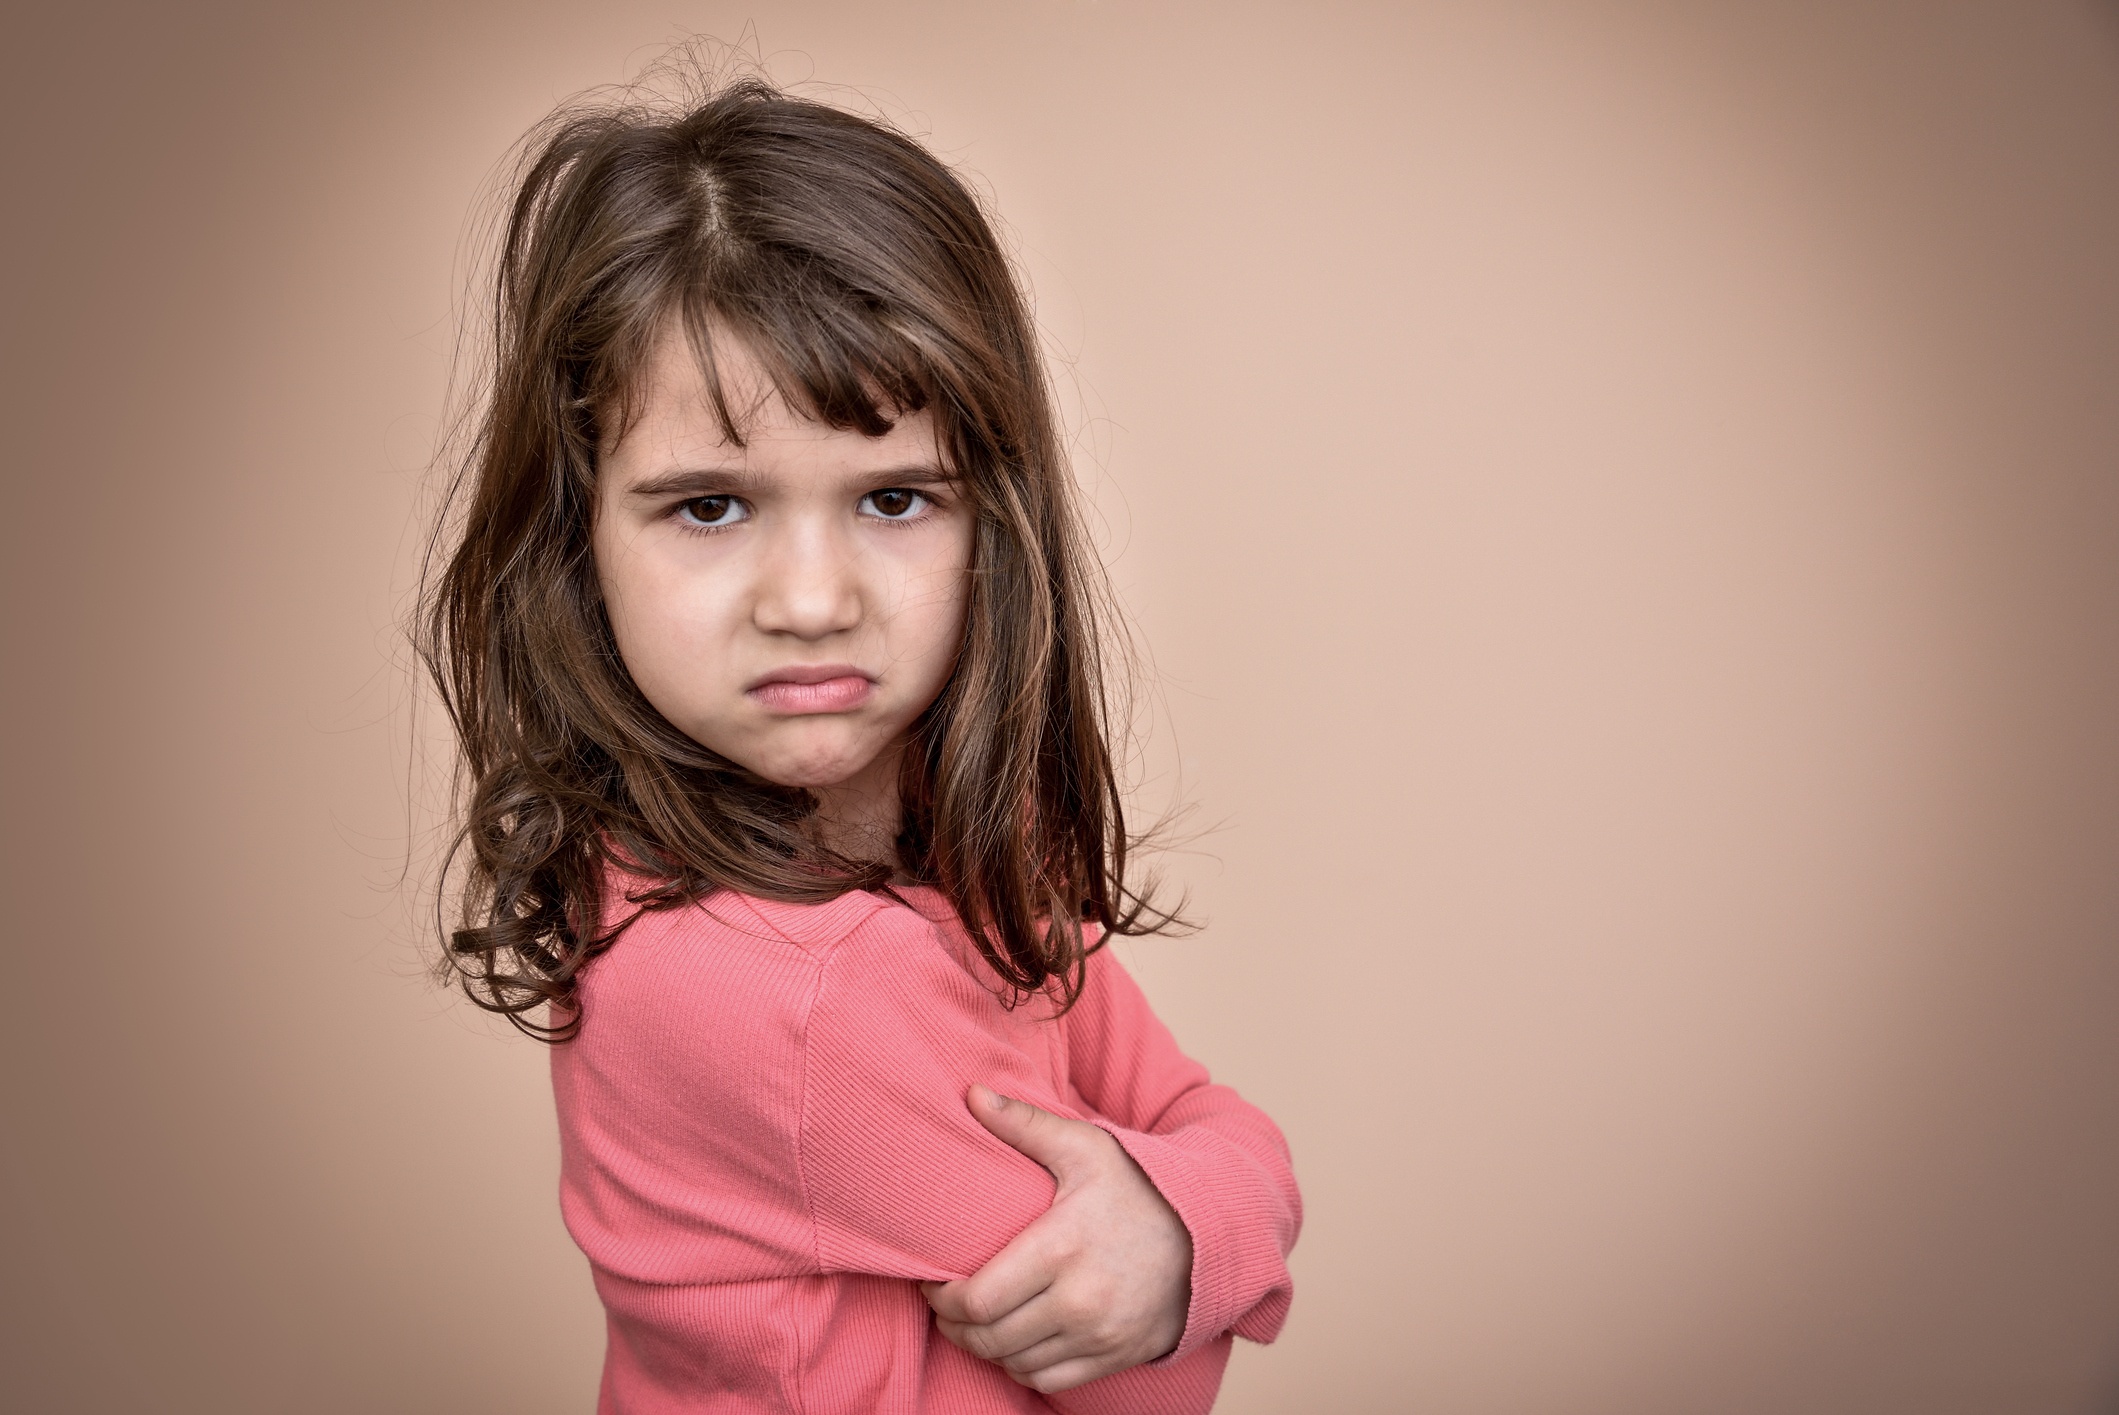 4 Common Behavior Issues in Children & What You Can Do